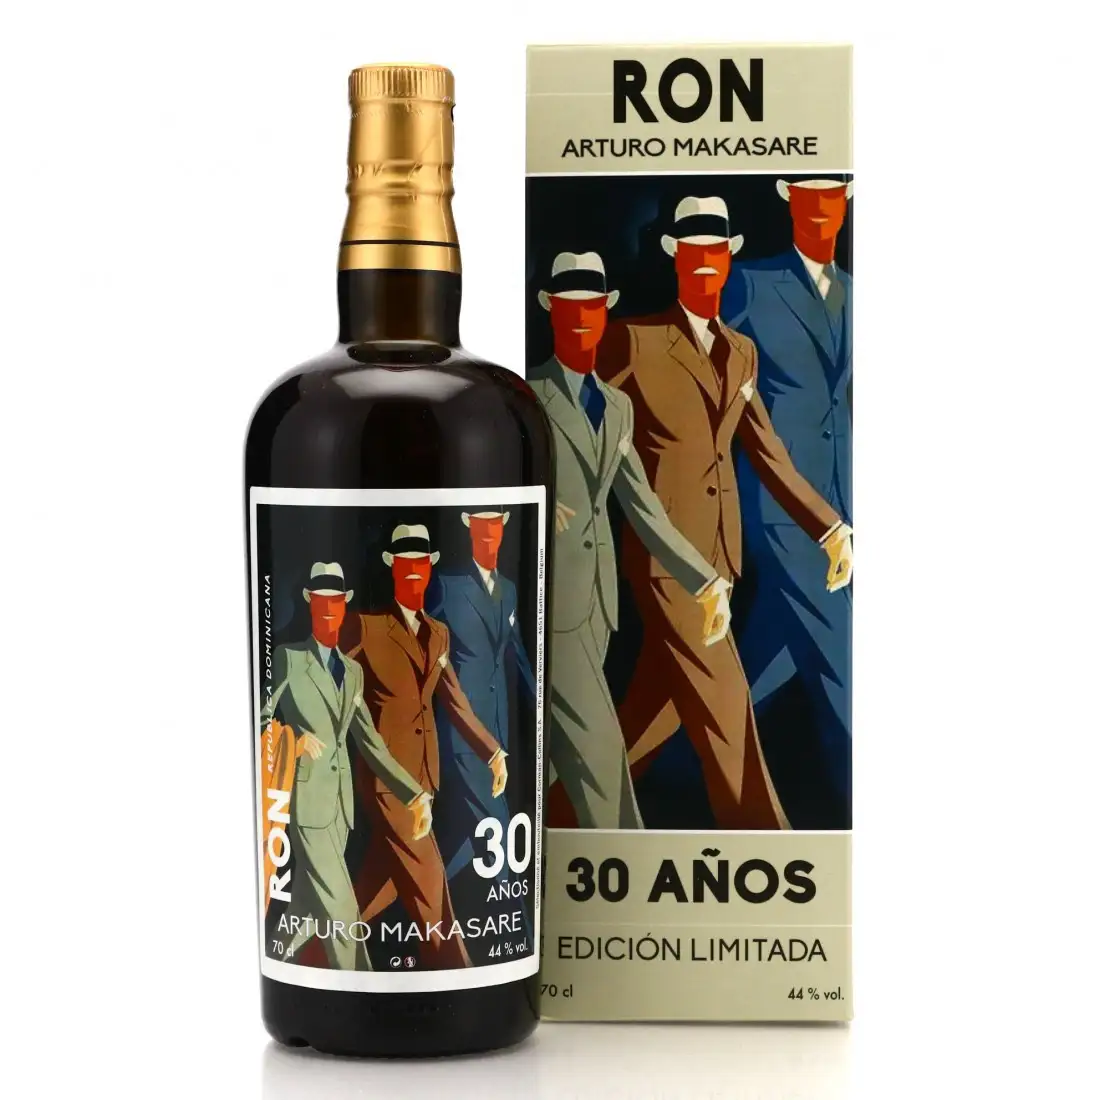 Image of the front of the bottle of the rum Arturo Makasare 30 años